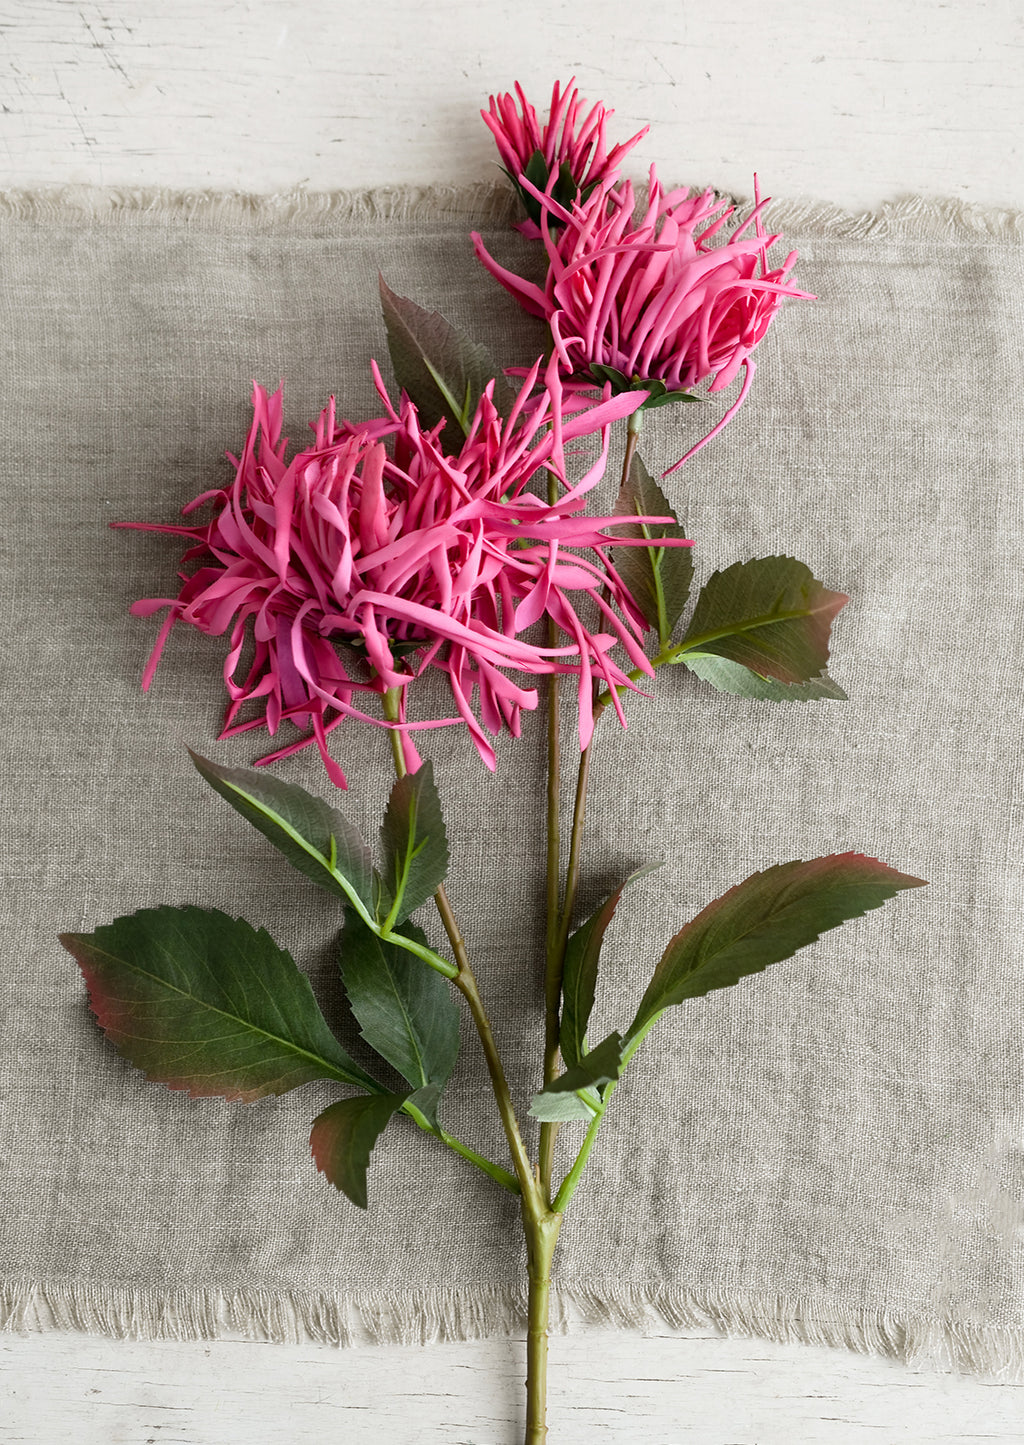 Berry Pink: A faux chrysanthemum stem with pink flowers.